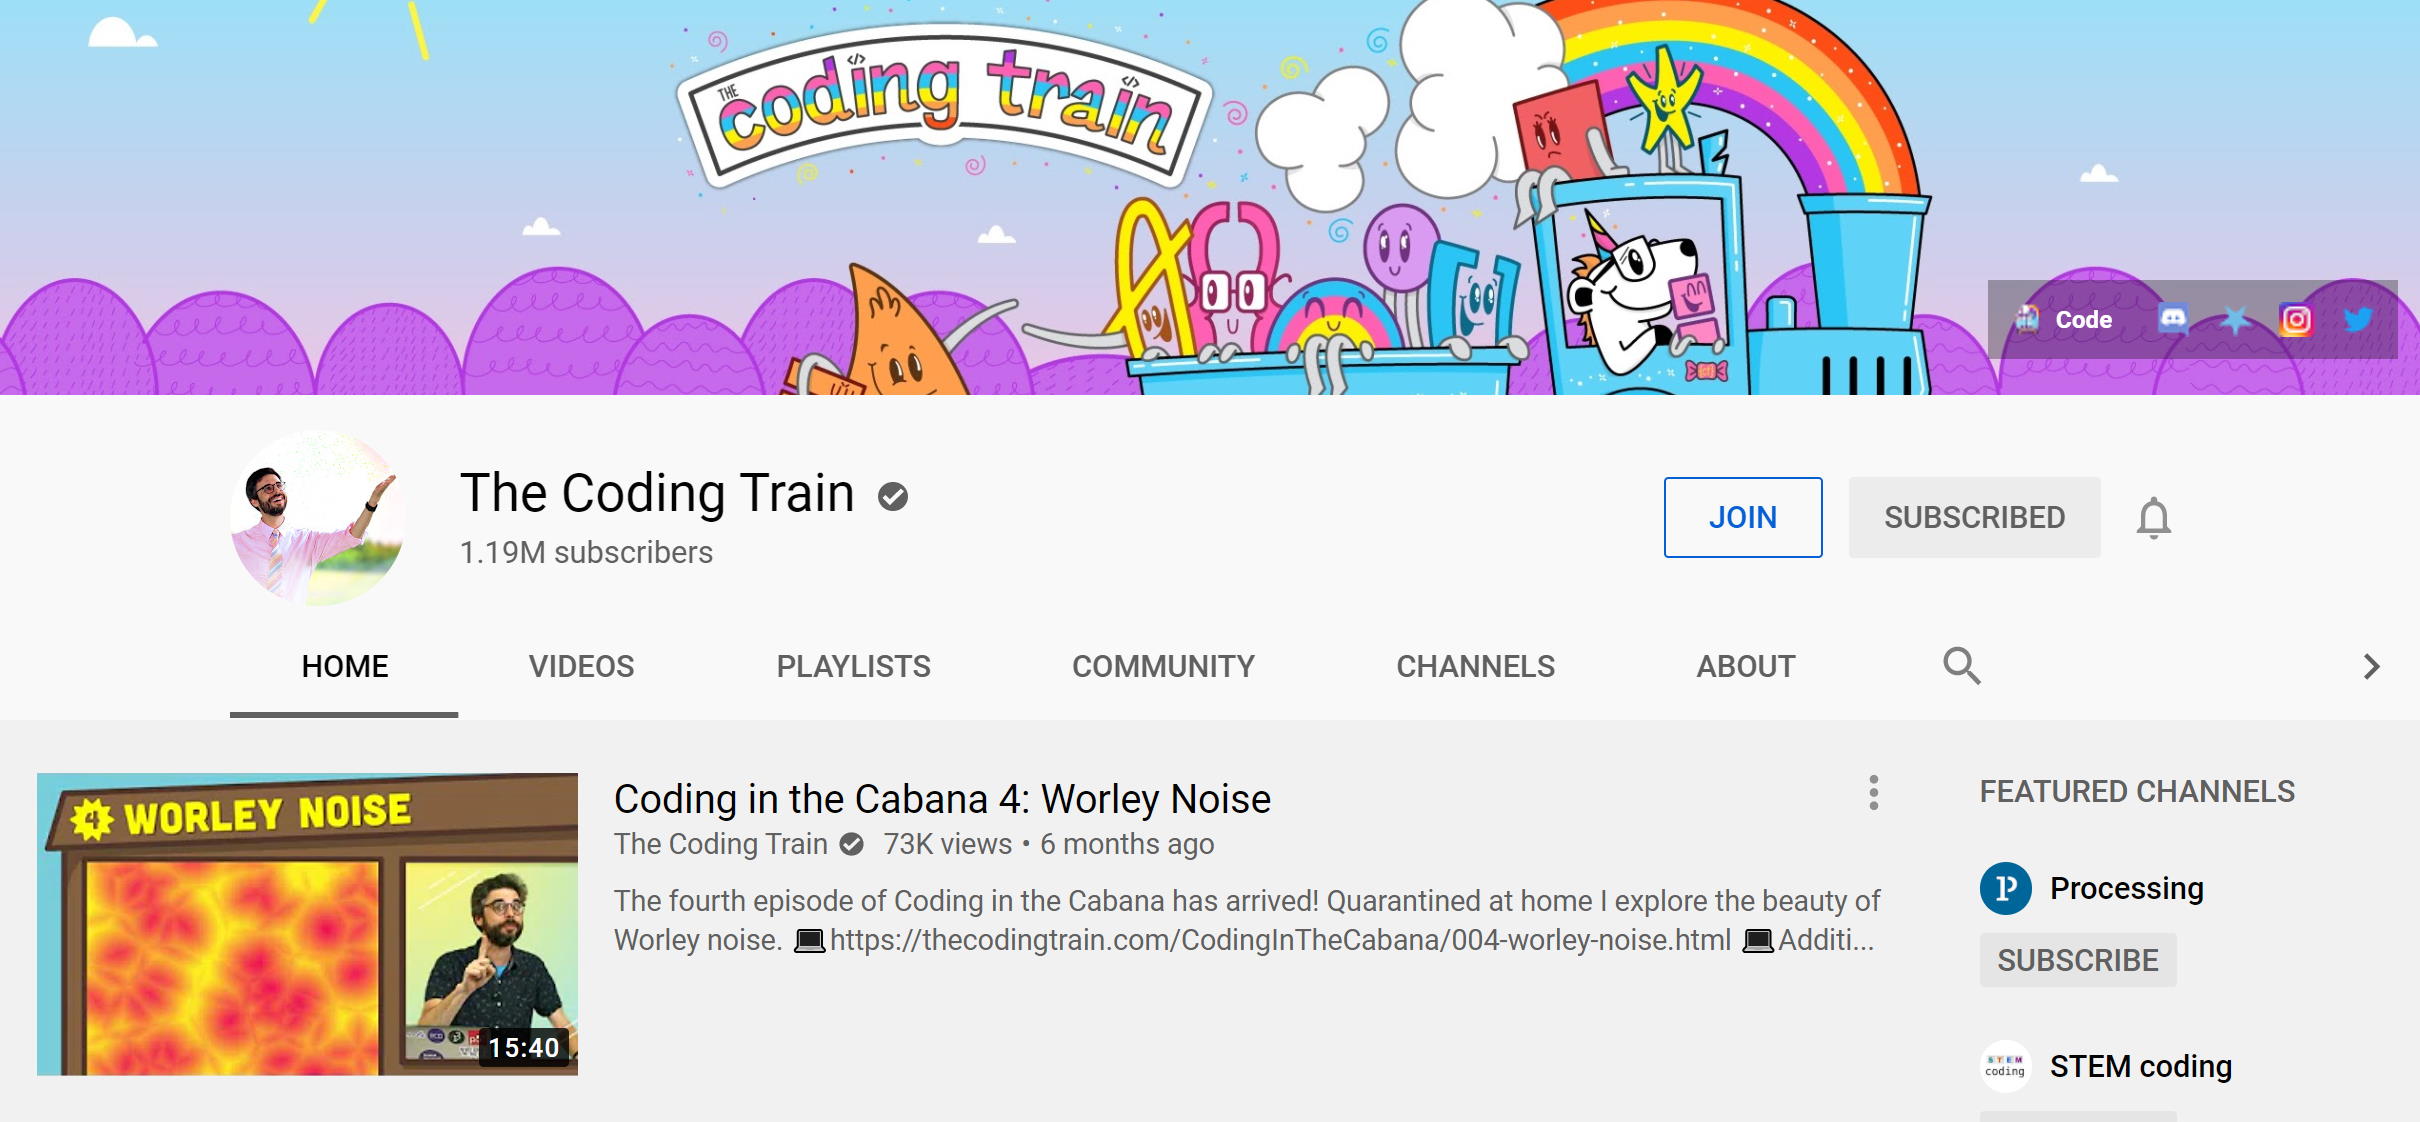 The Coding Train on YouTube